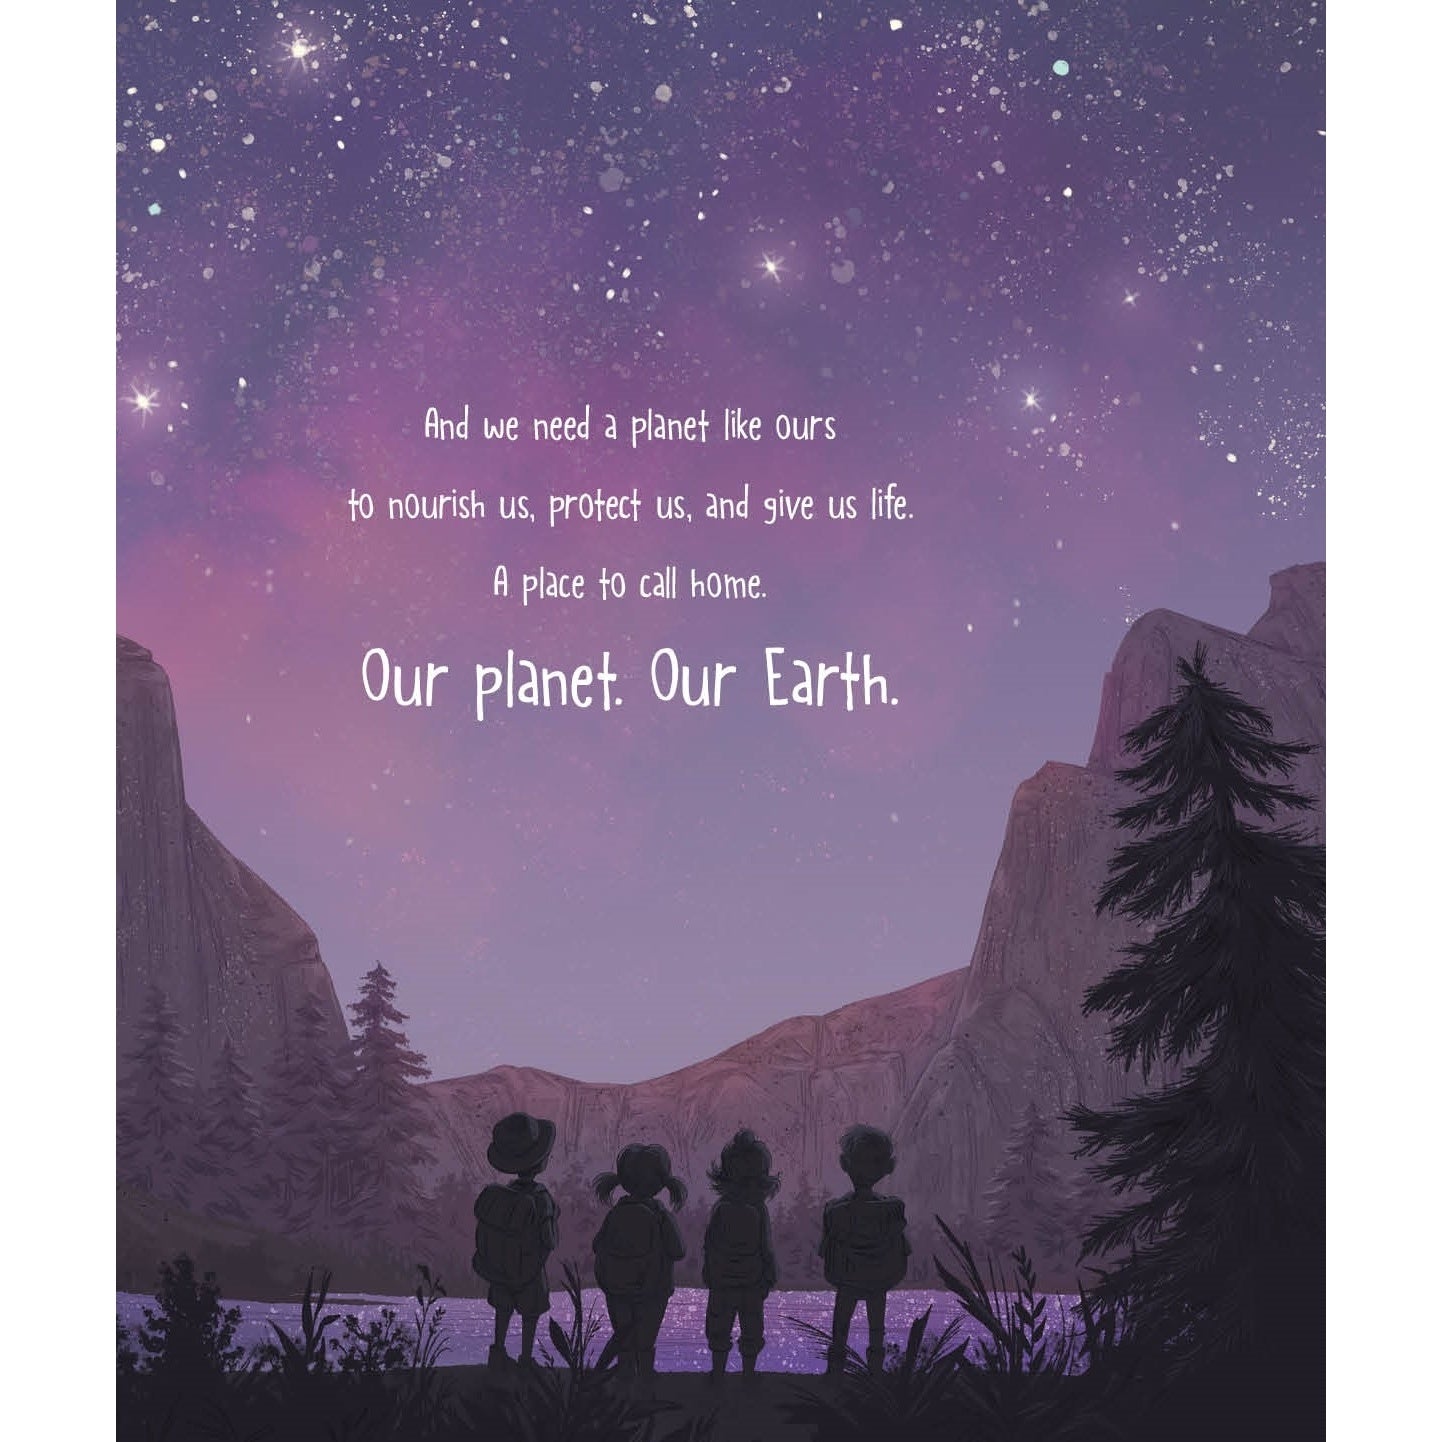 A Planet like Ours